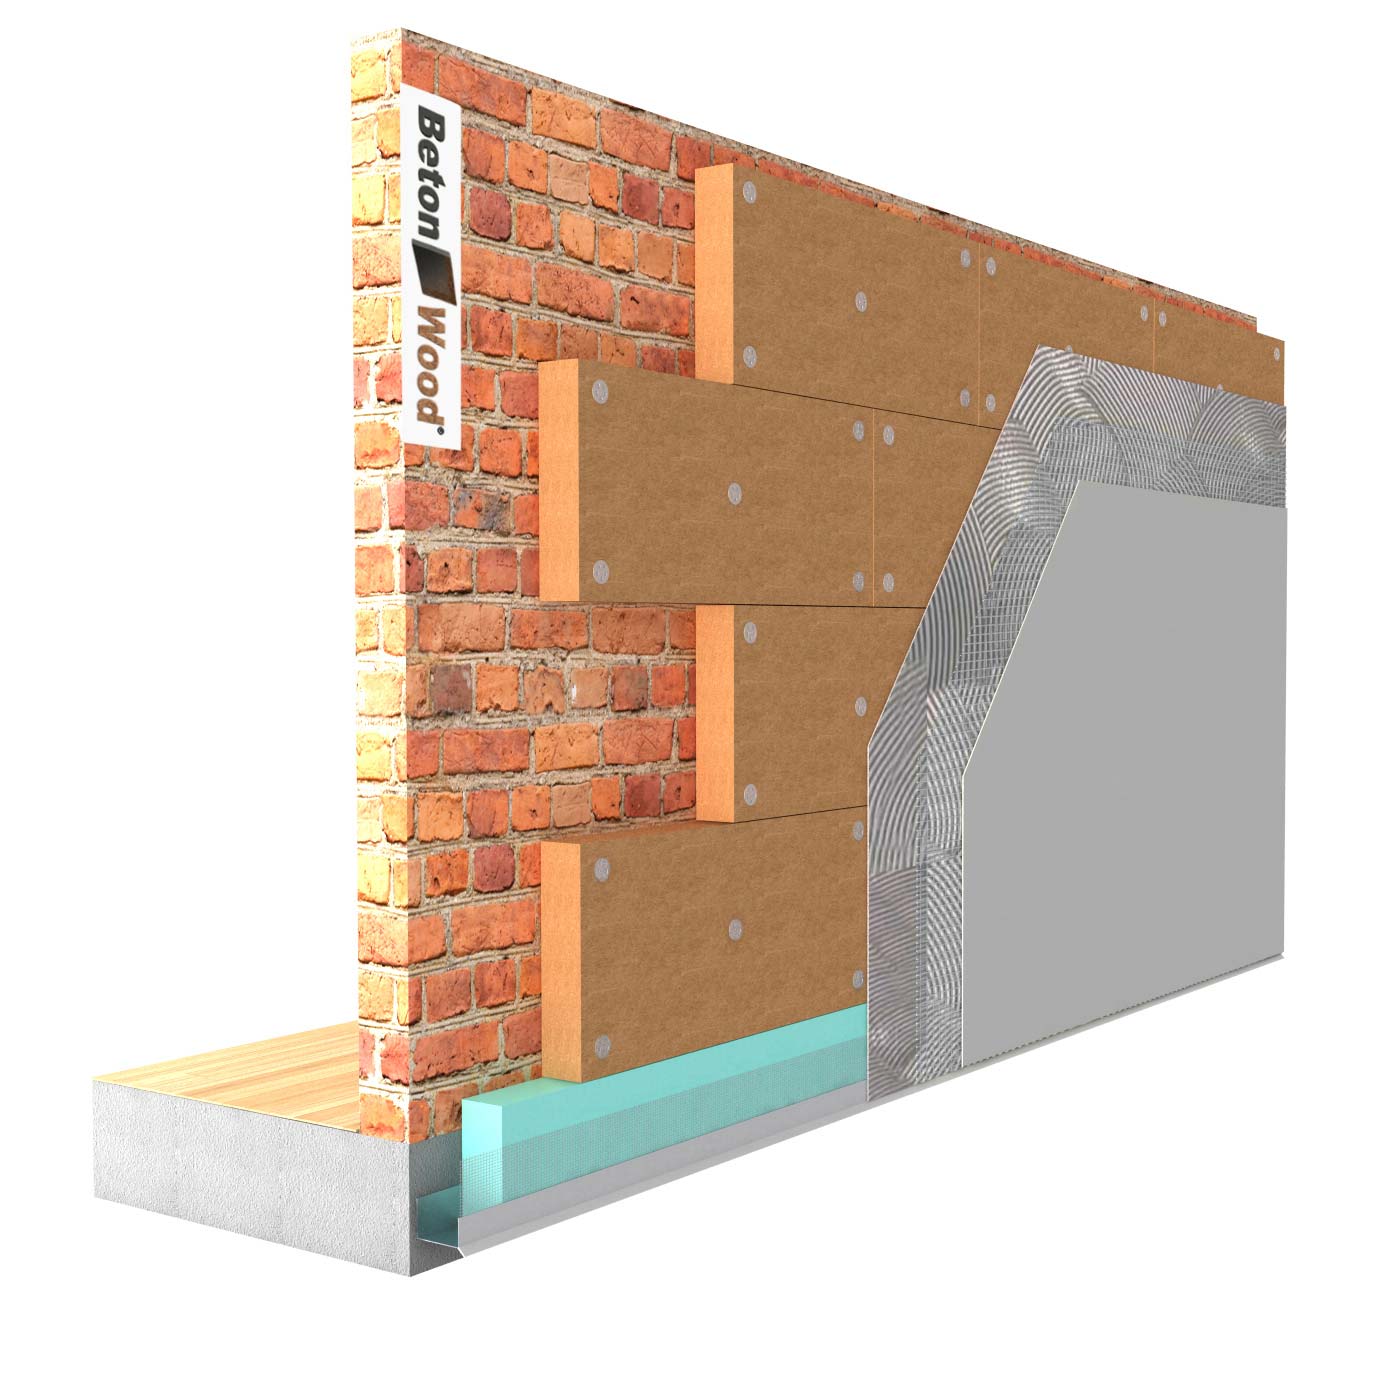 External thermal insulation system in Protect Fiber Wood